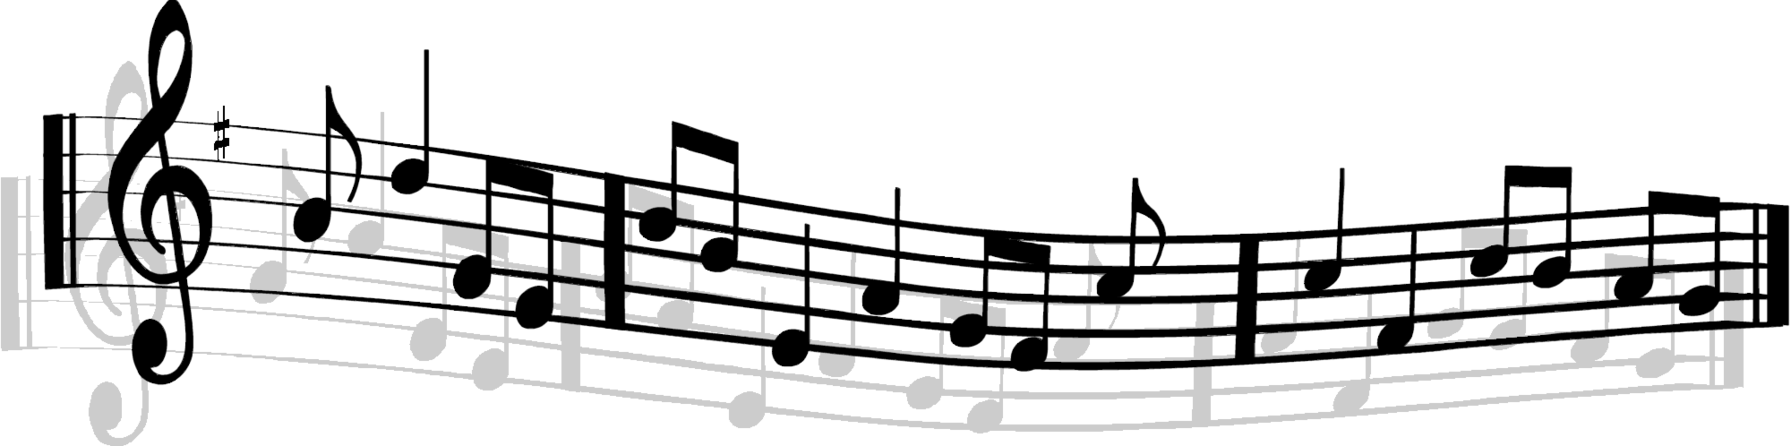 Music Staff Clip Art - Free Clipart Images